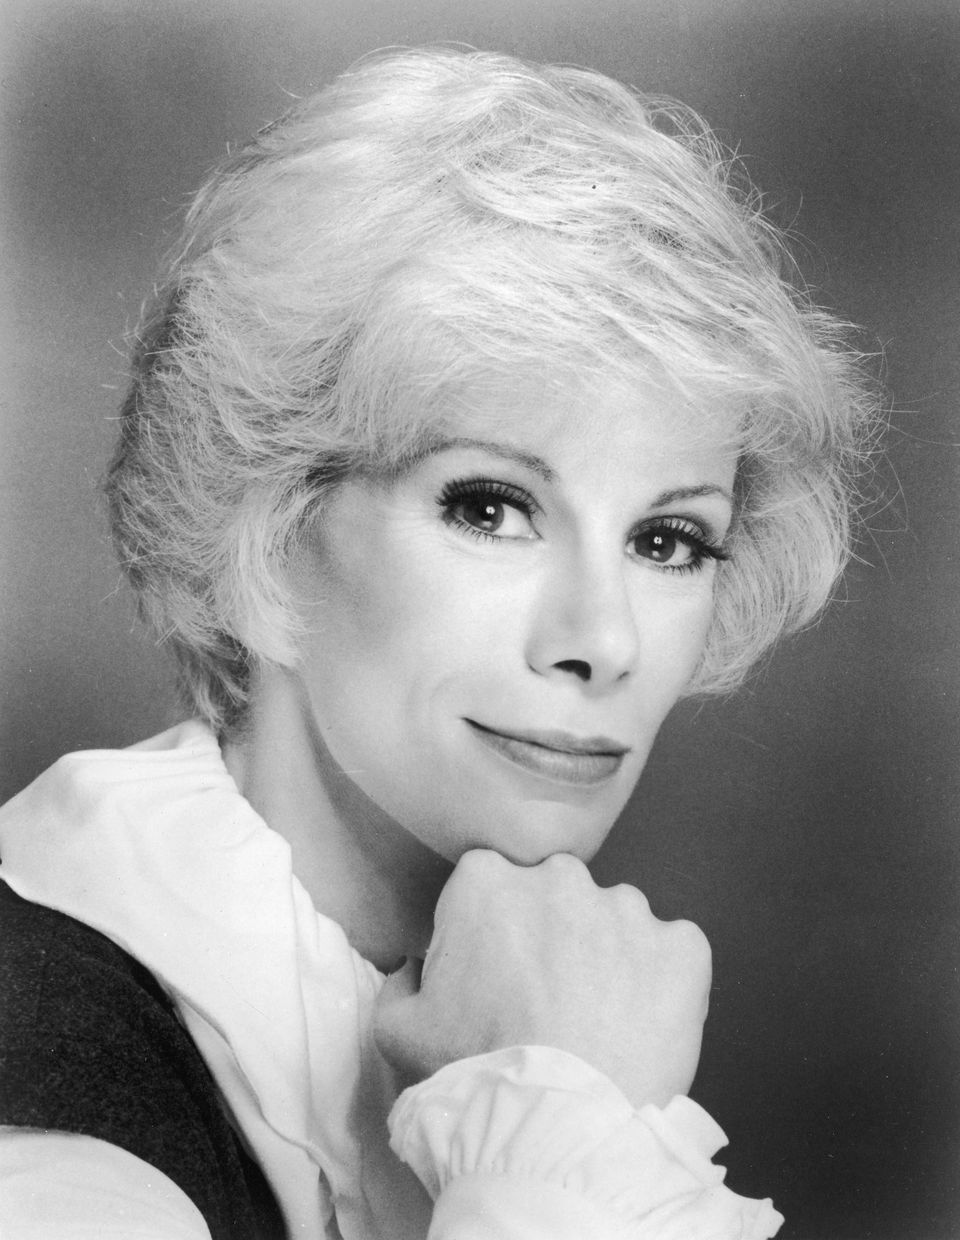 "<a href="http://www.theguardian.com/stage/2012/aug/09/comedy-gold-joan-rivers" role="link" class=" js-entry-link cet-external-link" data-vars-item-name="I hate thin people" data-vars-item-type="text" data-vars-unit-name="5bad4120e4b04234e8587e97" data-vars-unit-type="buzz_body" data-vars-target-content-id="http://www.theguardian.com/stage/2012/aug/09/comedy-gold-joan-rivers" data-vars-target-content-type="url" data-vars-type="web_external_link" data-vars-subunit-name="before_you_go_slideshow" data-vars-subunit-type="component" data-vars-position-in-subunit="0">I hate thin people</a>; 'Oh, does the tampon make me look fat?'"